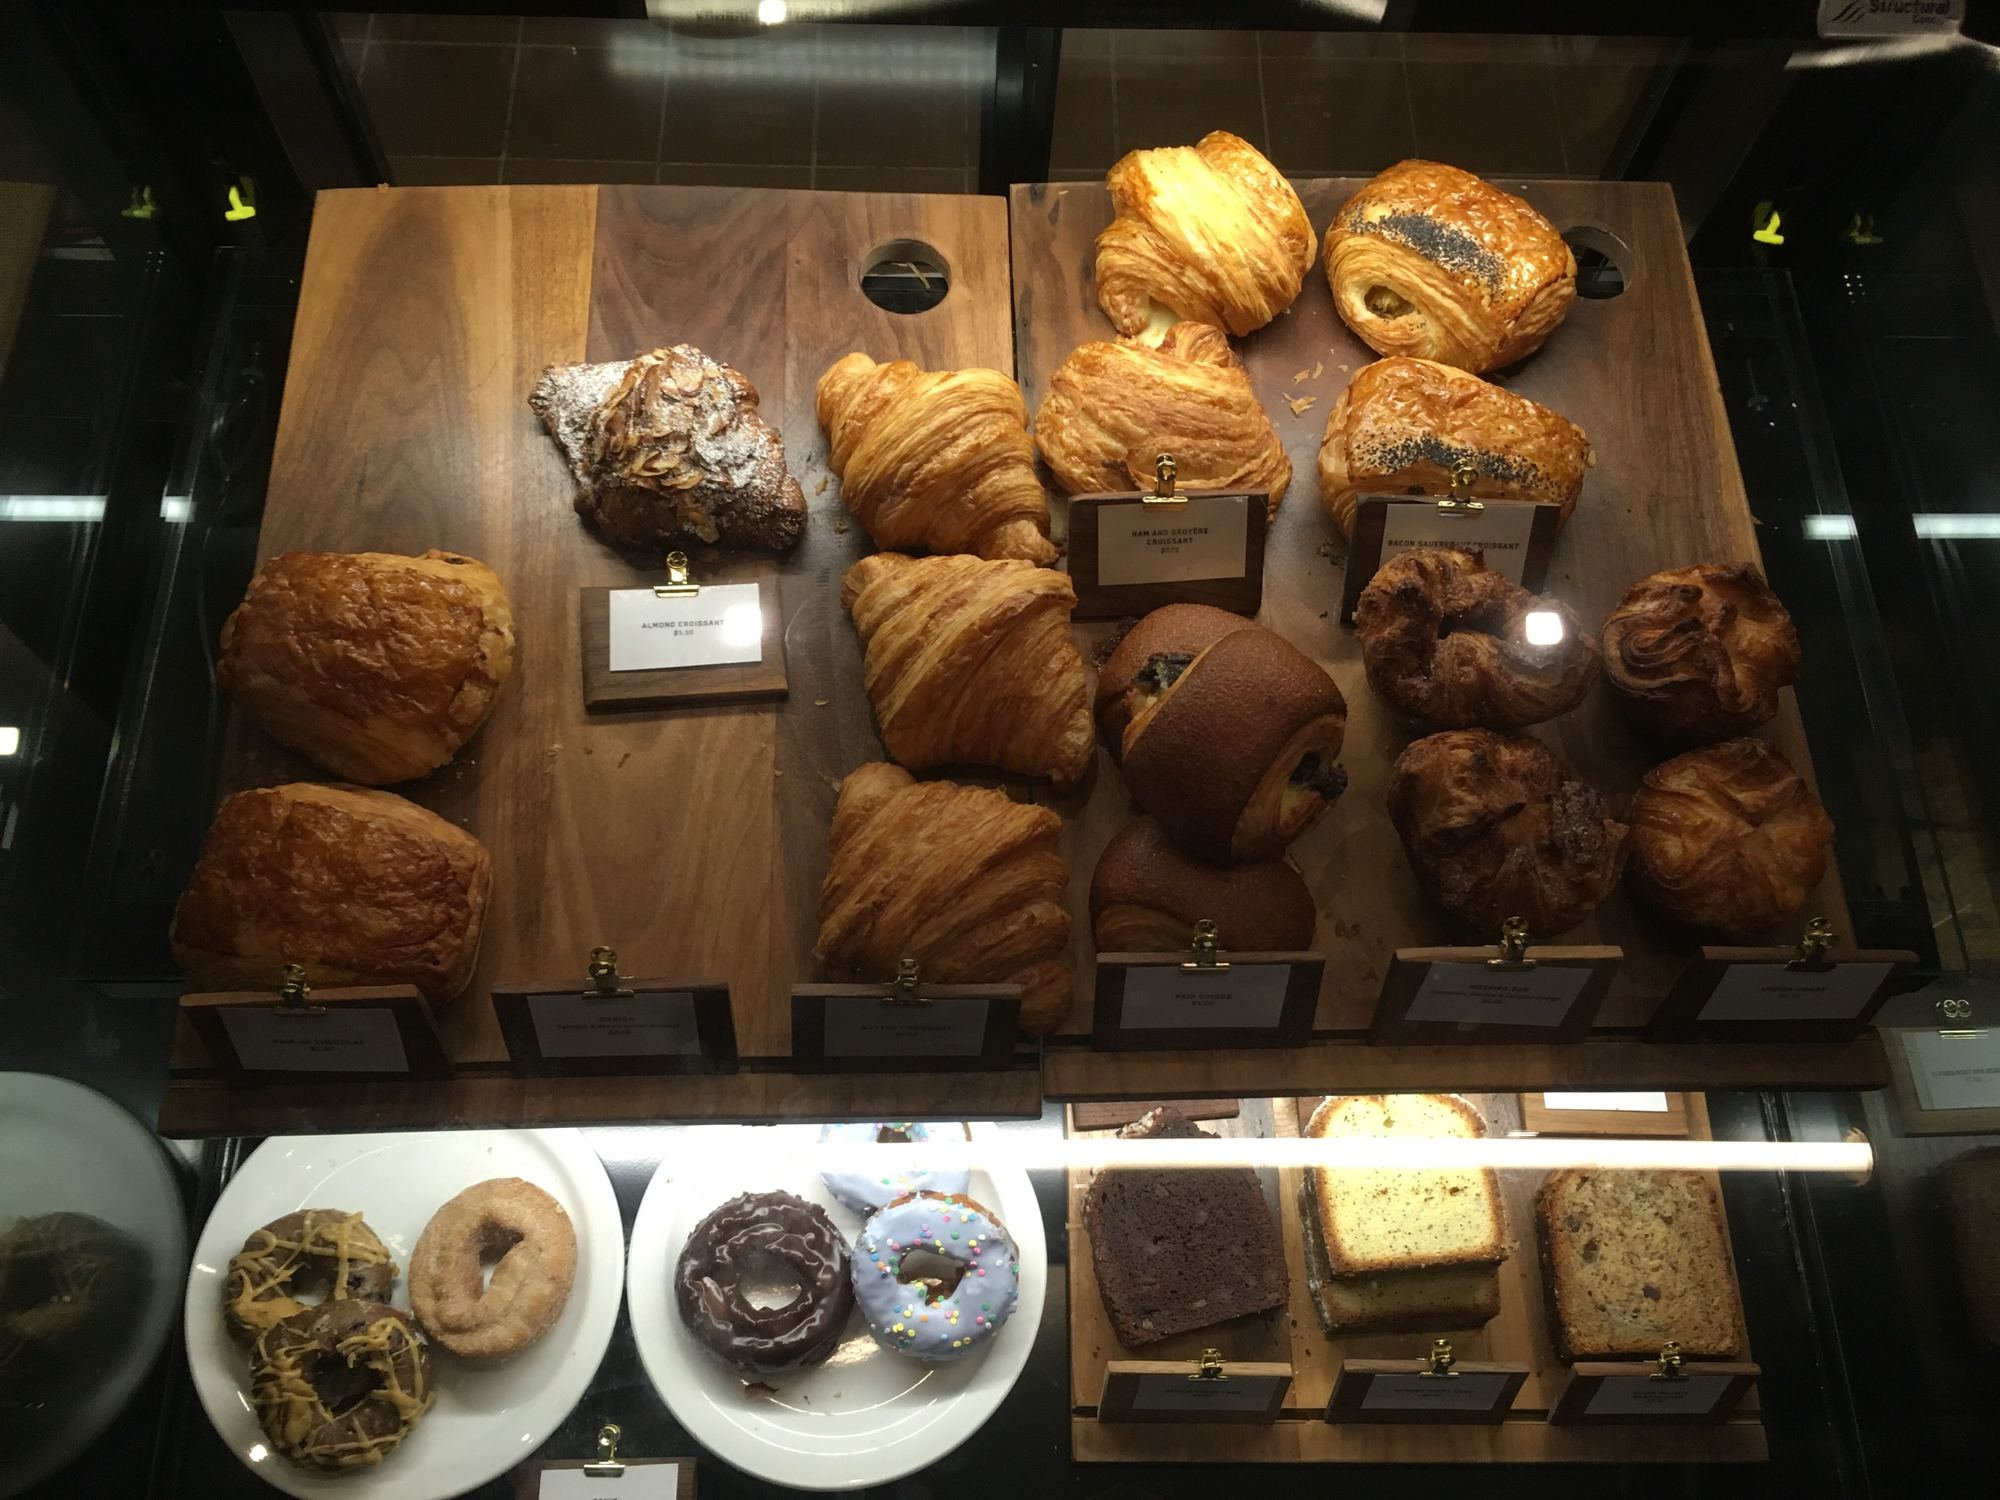 The Spyhouse coffee in the new Emery features Black Walnut pastries